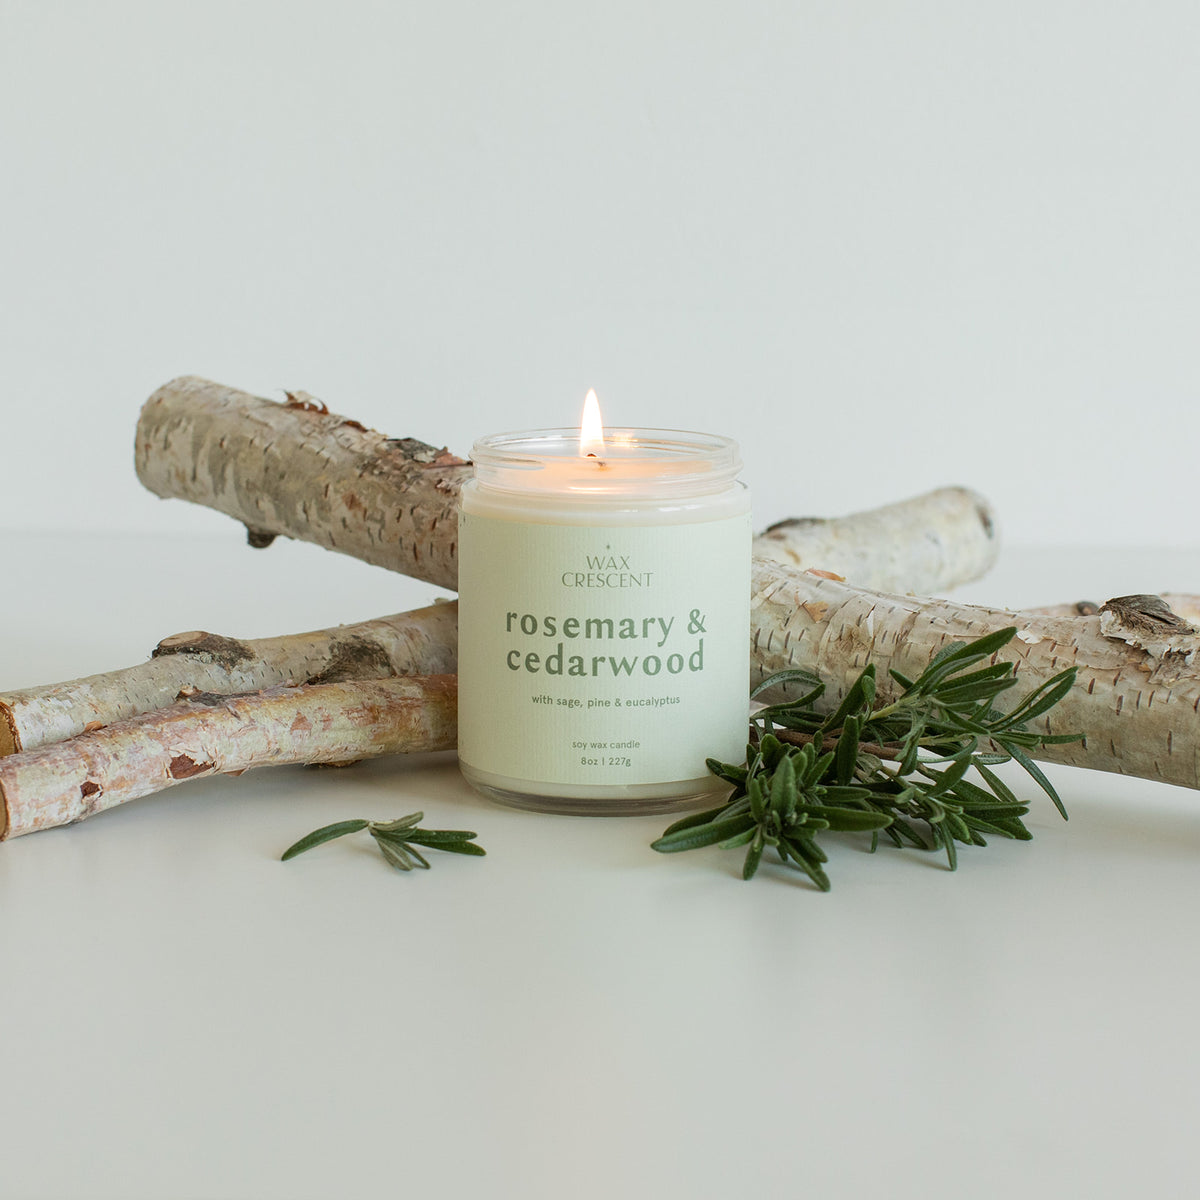  Aromatherapy Organic Cedarwood Rosemary Natural Soy Wax Candle, Dry Flowers Scented, 100% Pure Essential Oil, Gift for Your Partner, Home Decor, Relax Your Mind